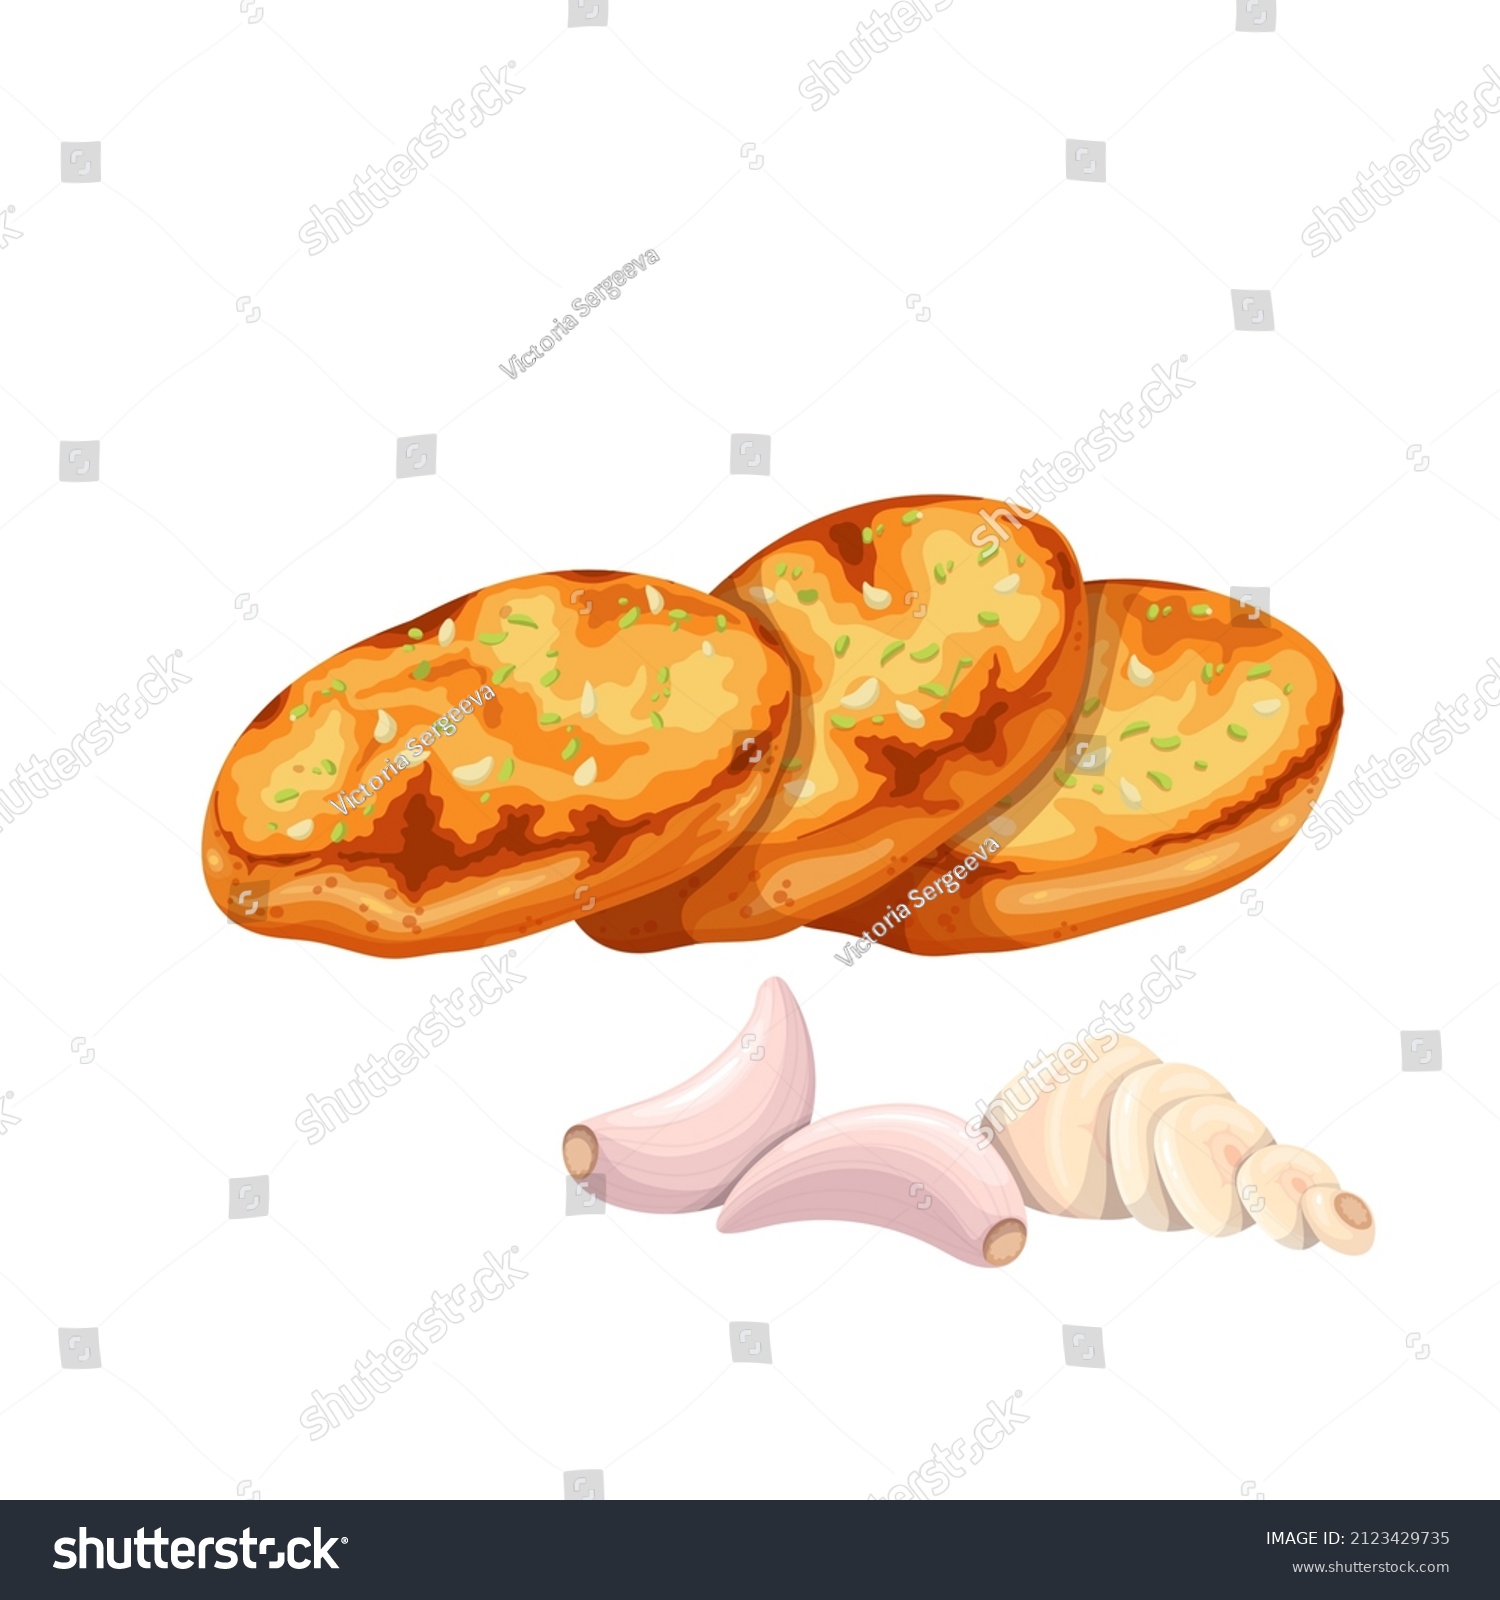 Crunchy garlic bread with garlic cloves. Vector illustration of fried french baguette #2123429735